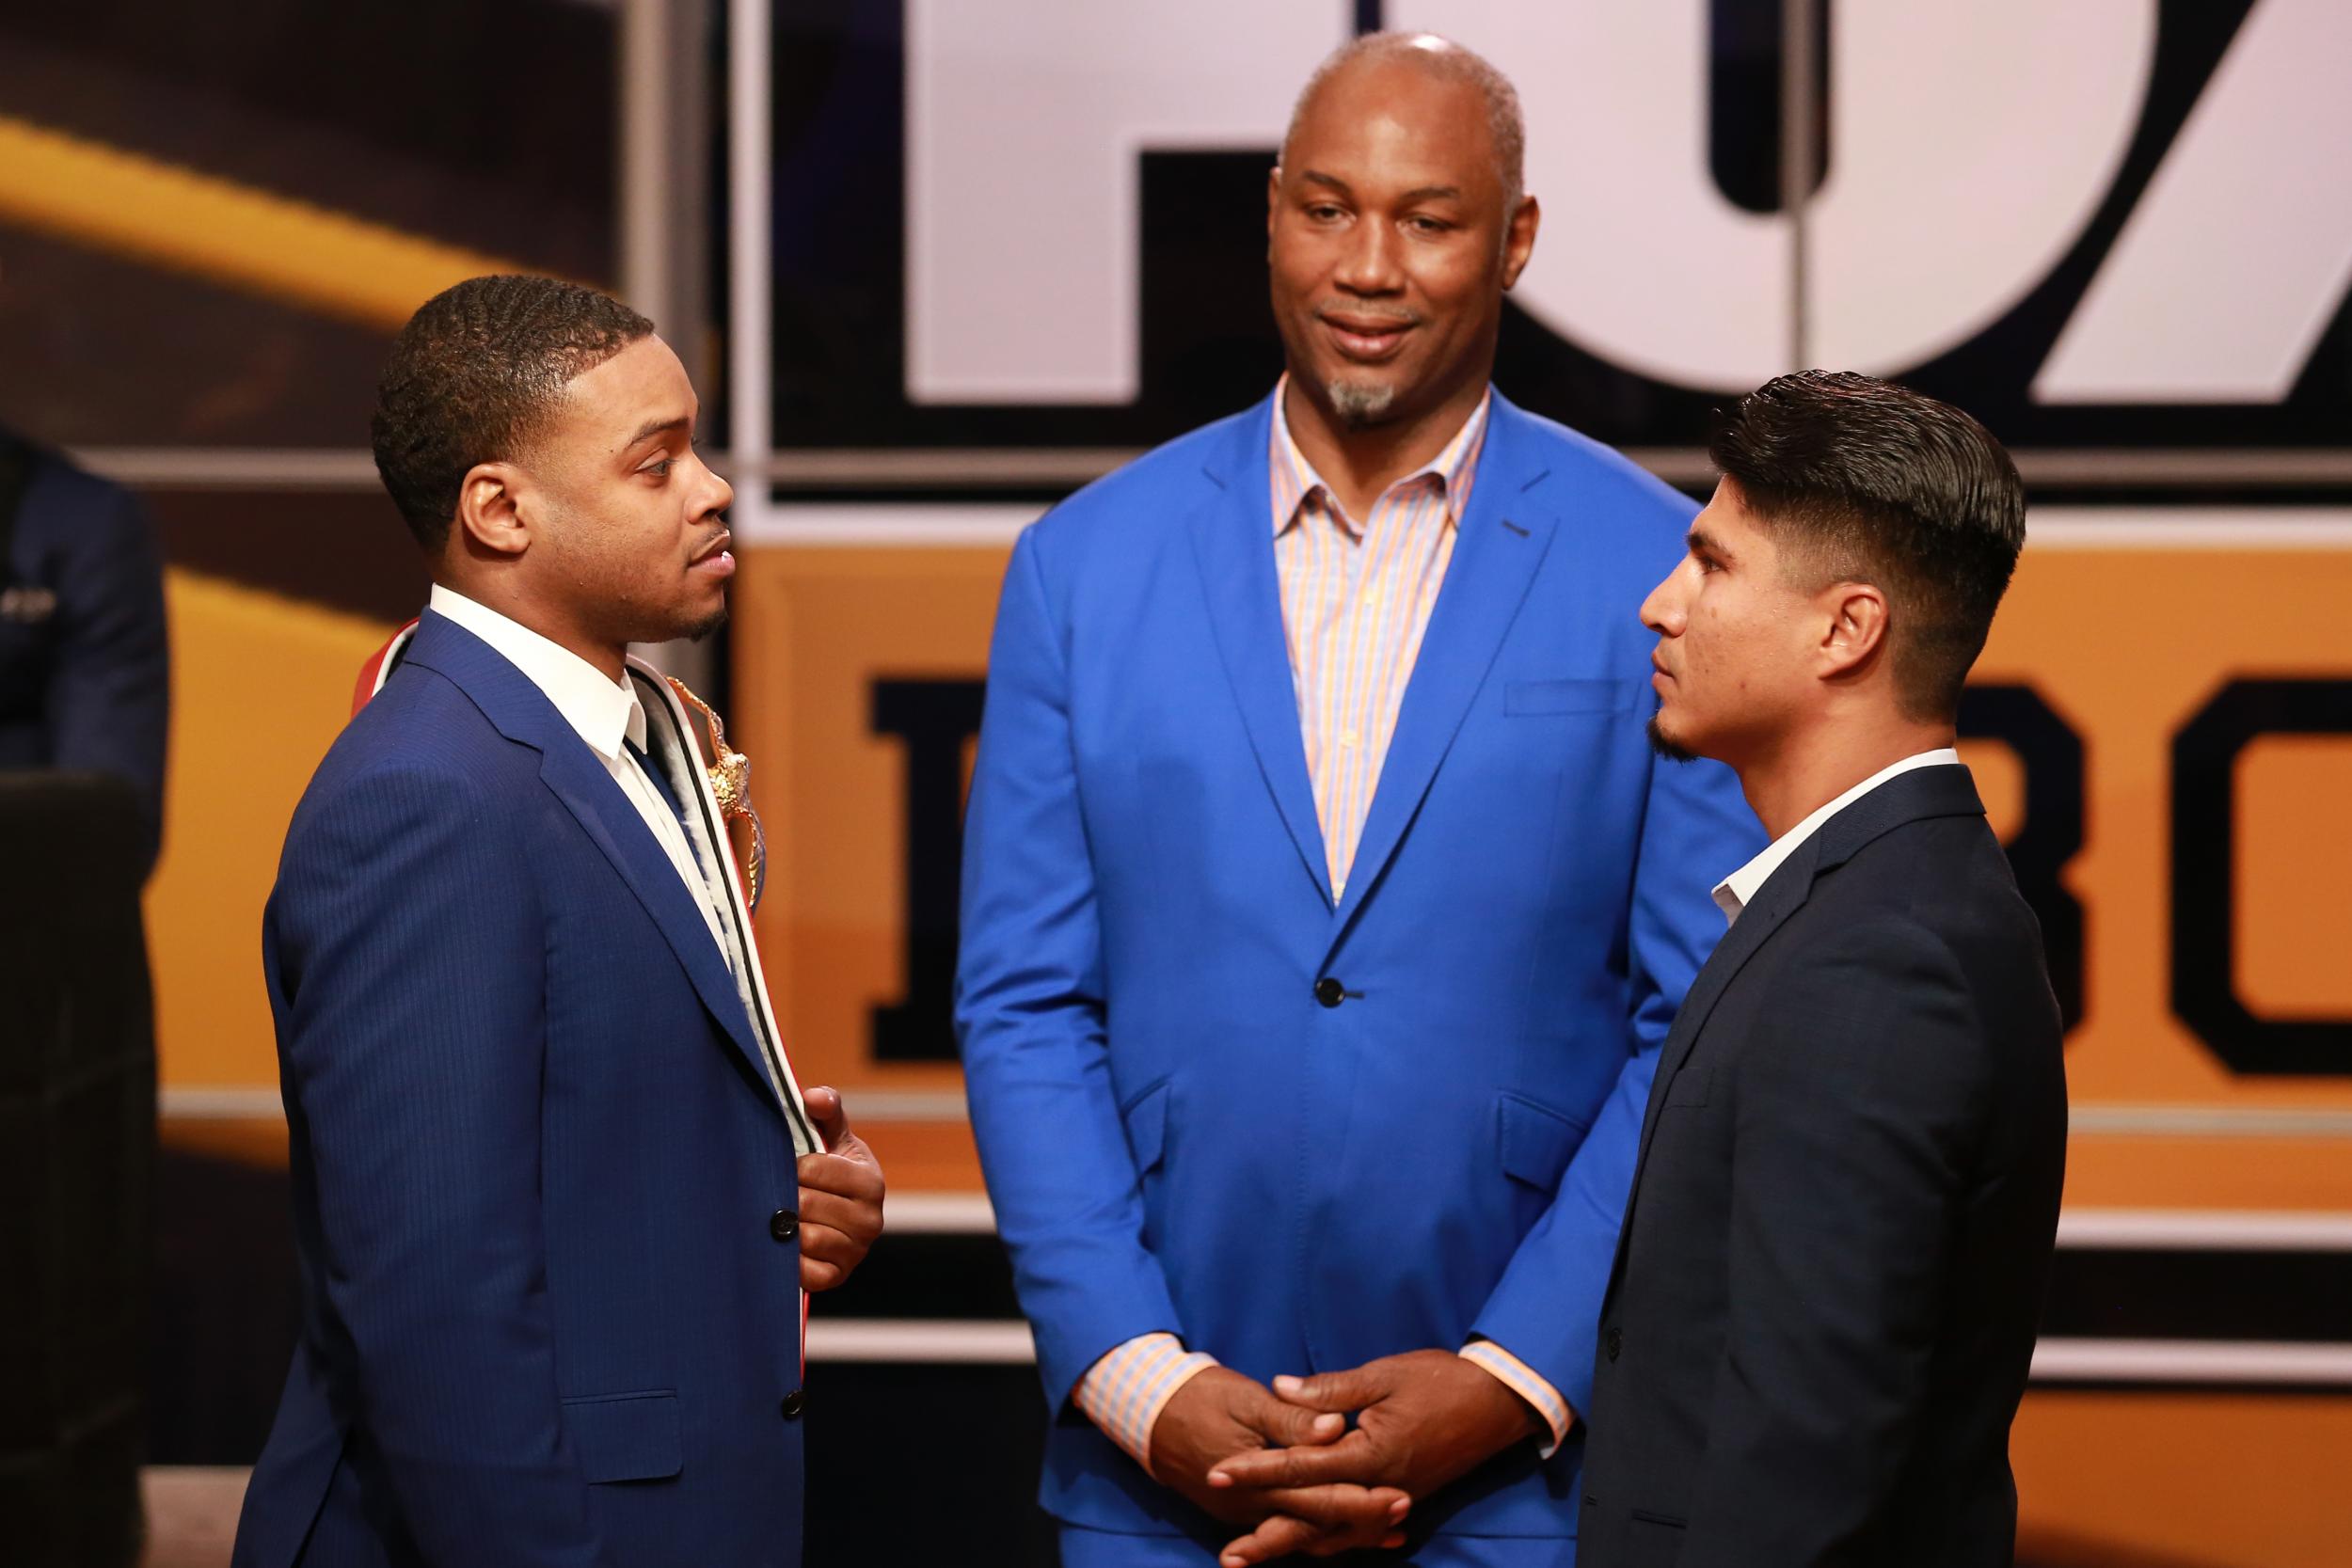 Spence and Garcia stare each other down as Lennox Lewis watches on (Getty)